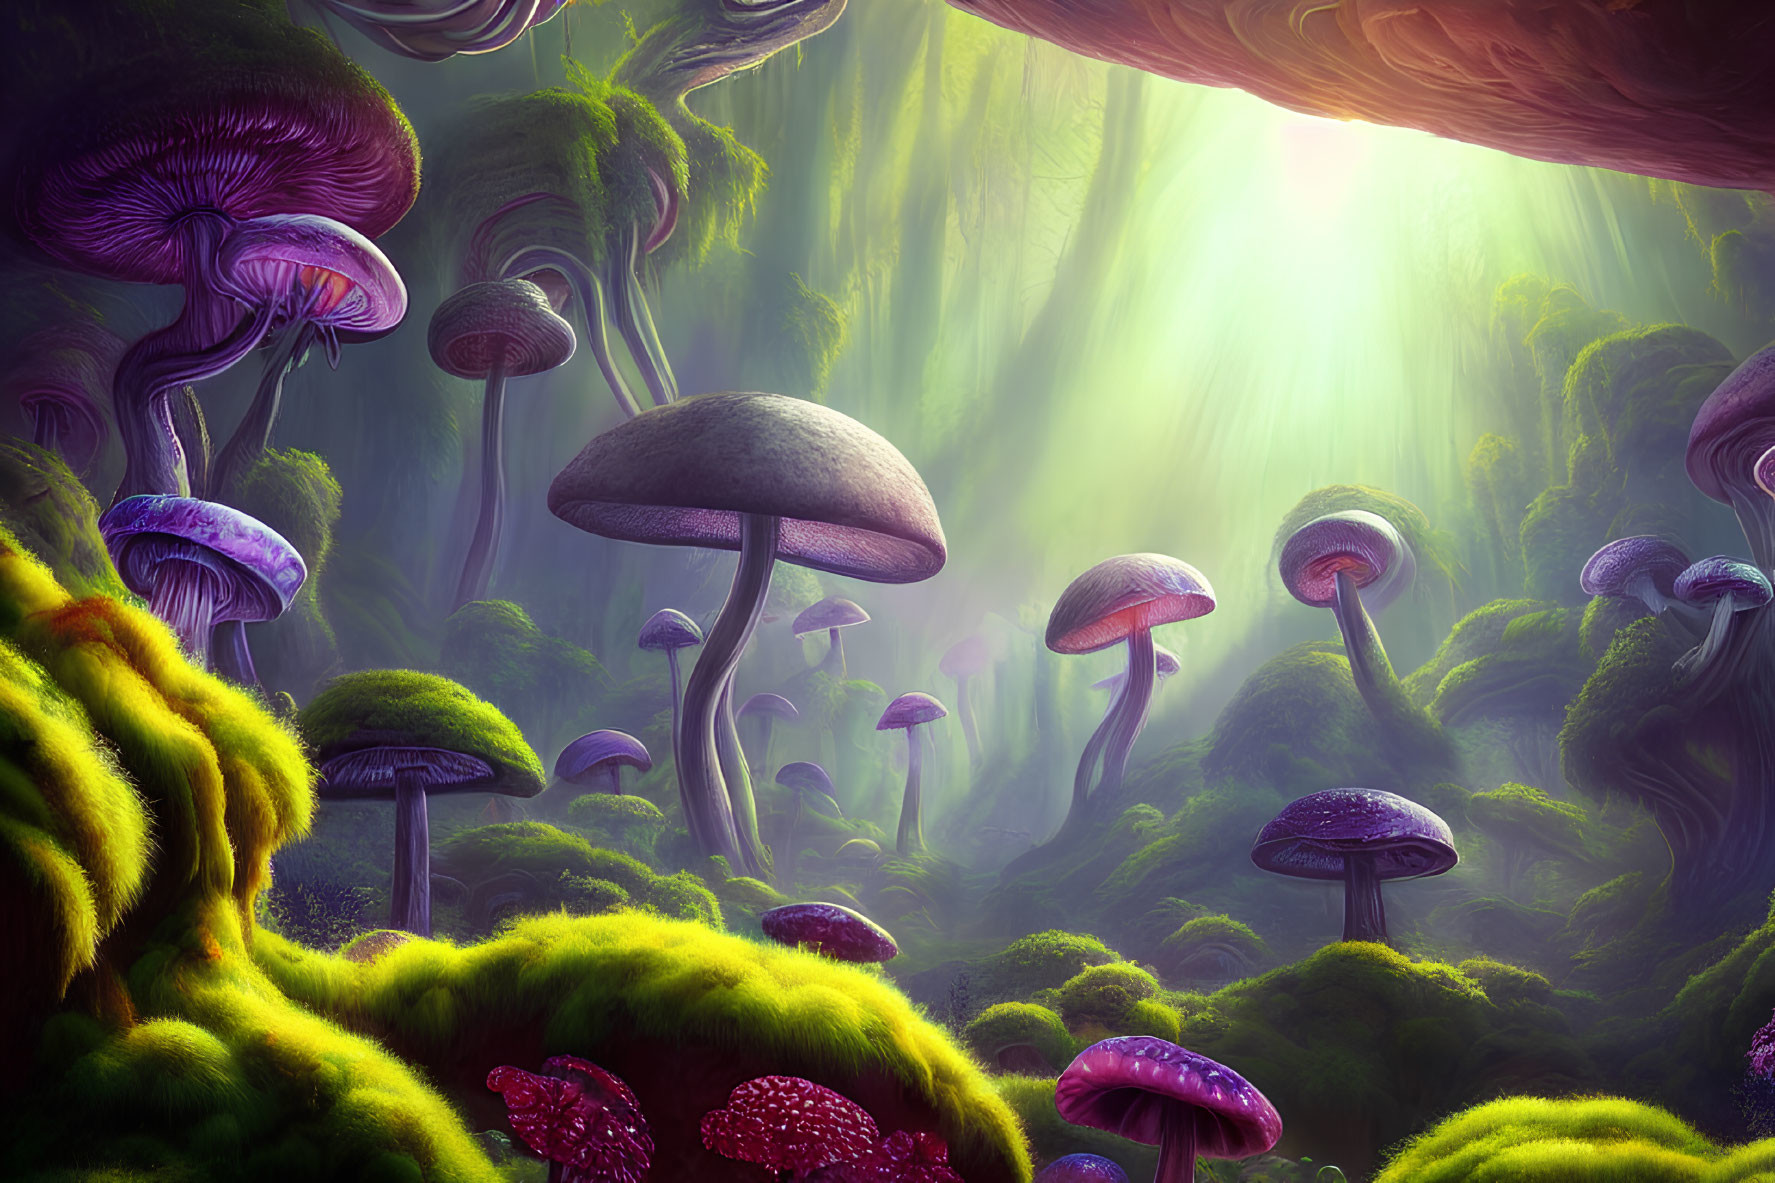 Fantasy forest with oversized purple and red mushrooms under a green canopy